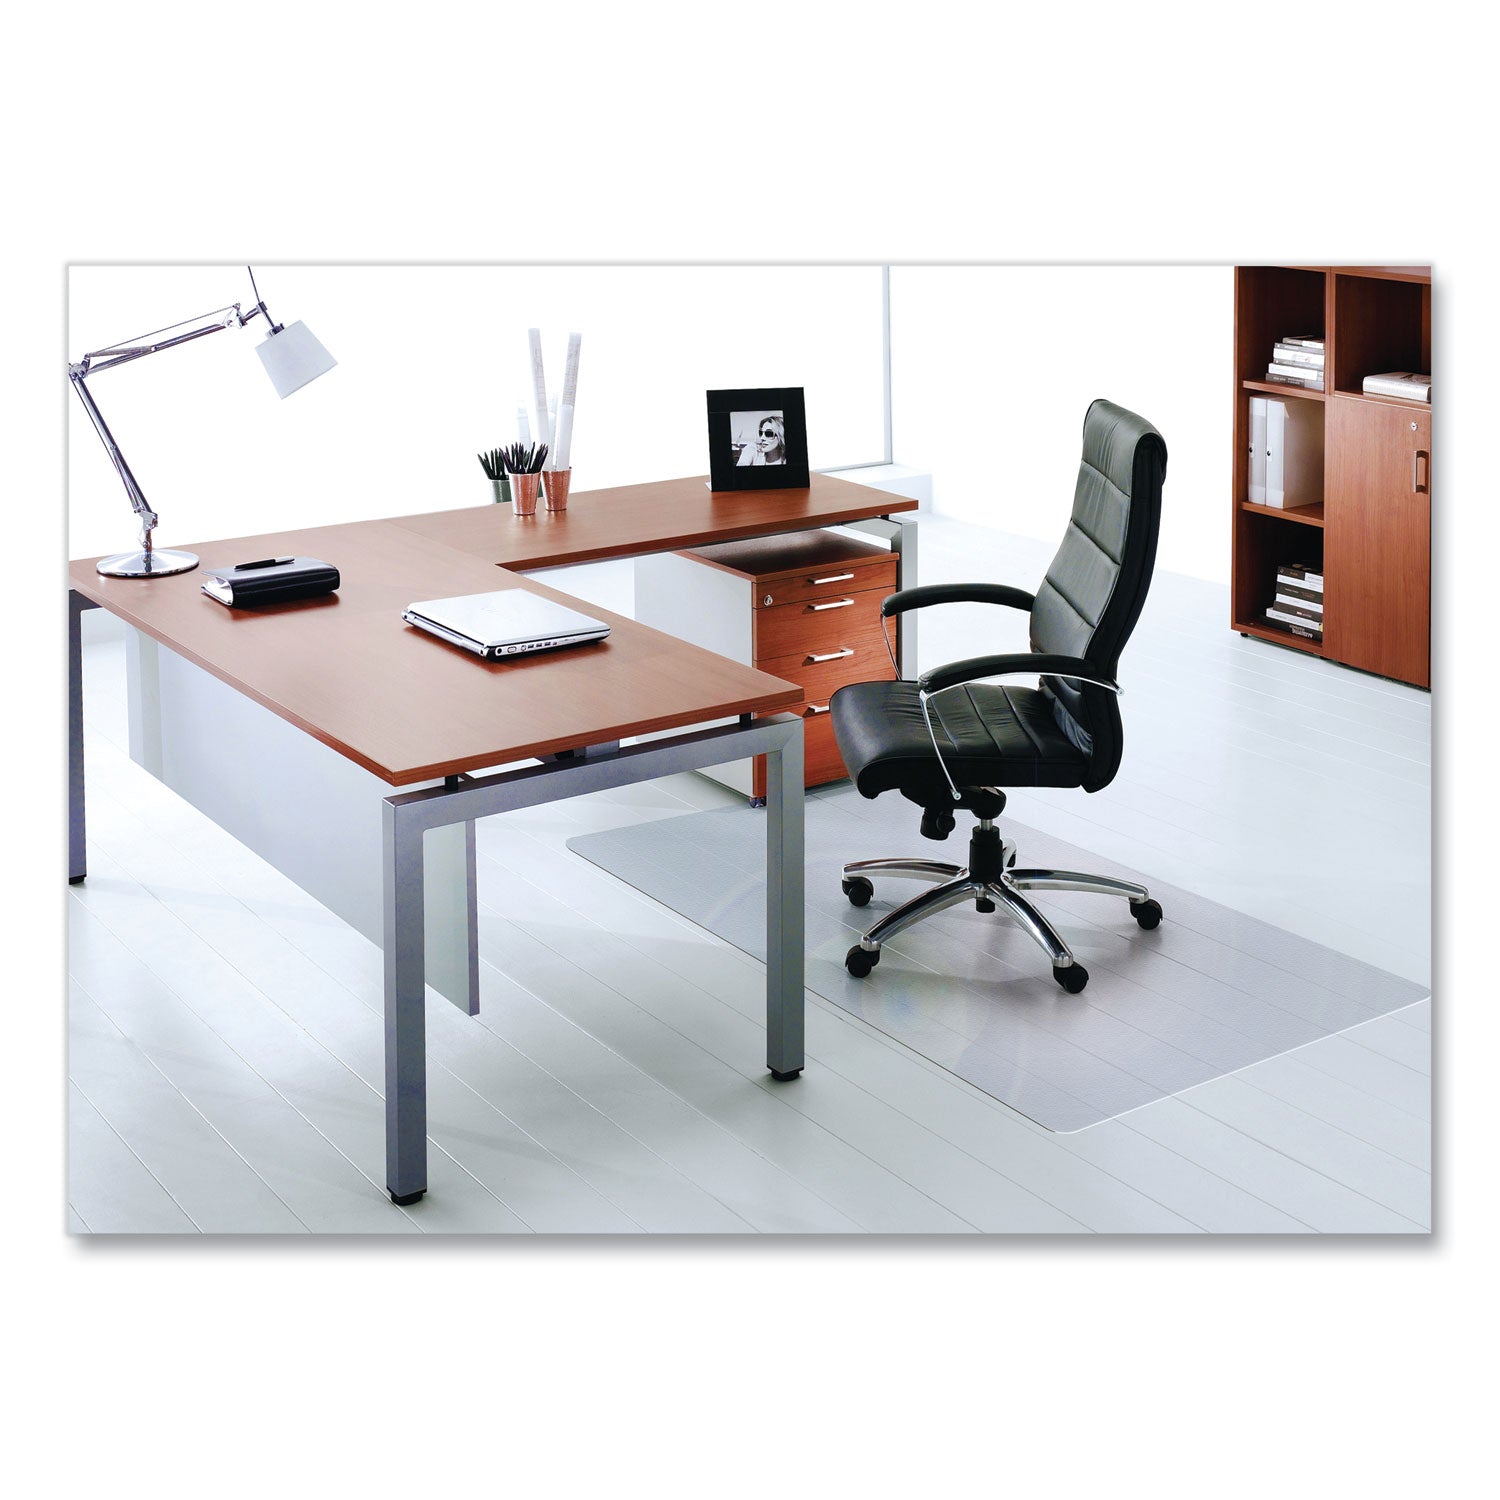 cleartex-ultimat-polycarbonate-chair-mat-for-hard-floors-48-x-60-clear_flrer1215219er - 1